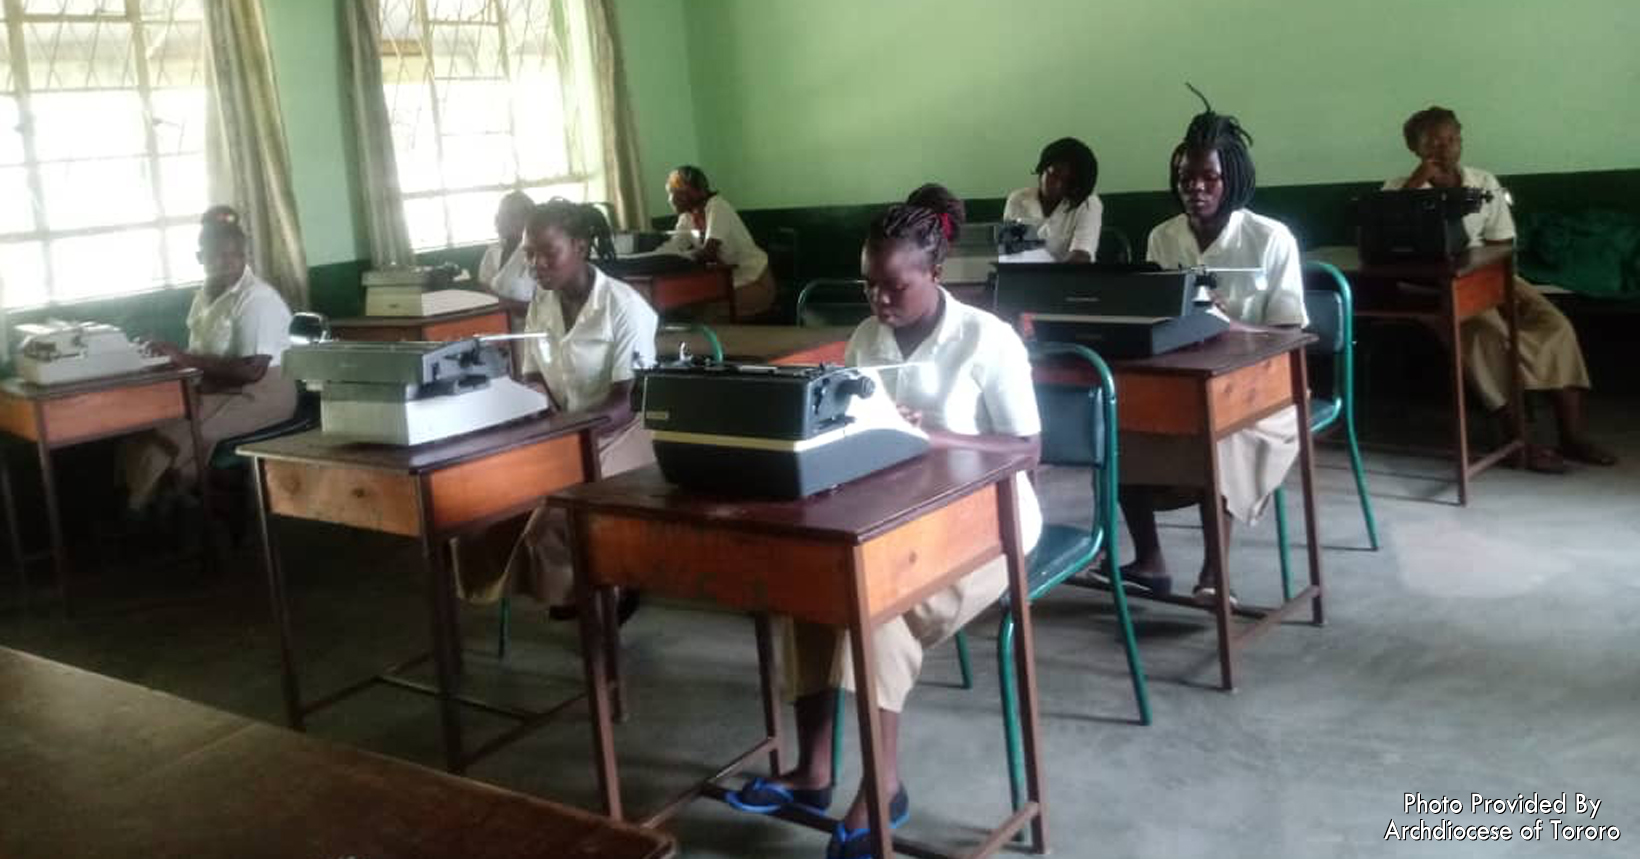 These young girls are secretarial students and are practicing typing on their manual typewriters.